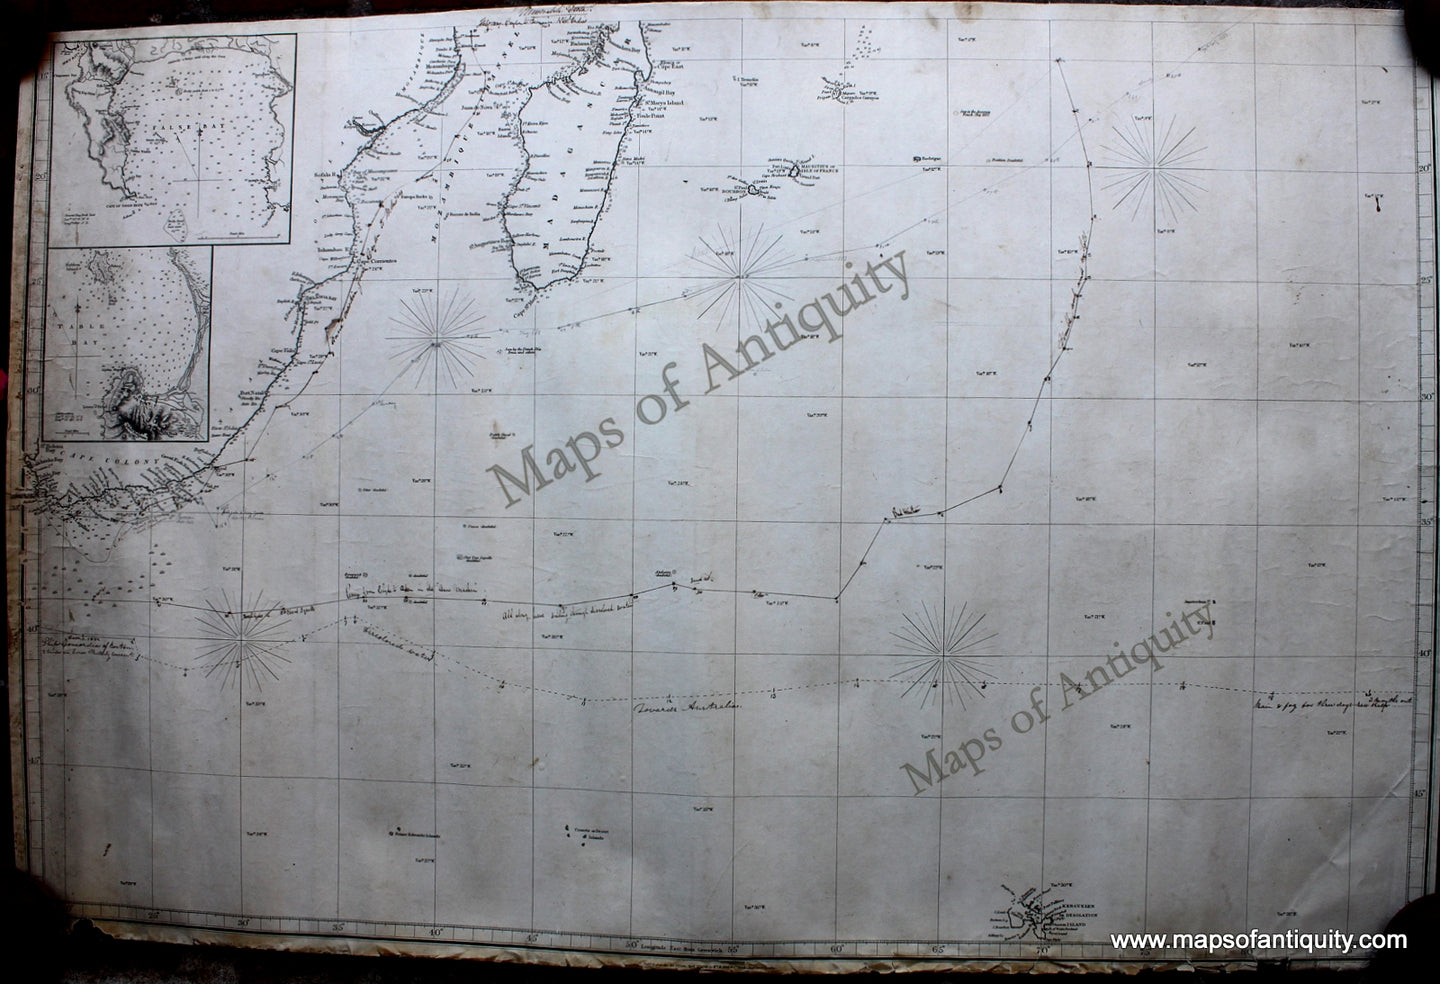 Antique-Nautical-Chart-Southwest-Indian-Ocean-to-Cape-of-Good-Hope.-**********-Nautical-Africa-South-1845-Walker-Maps-Of-Antiquity